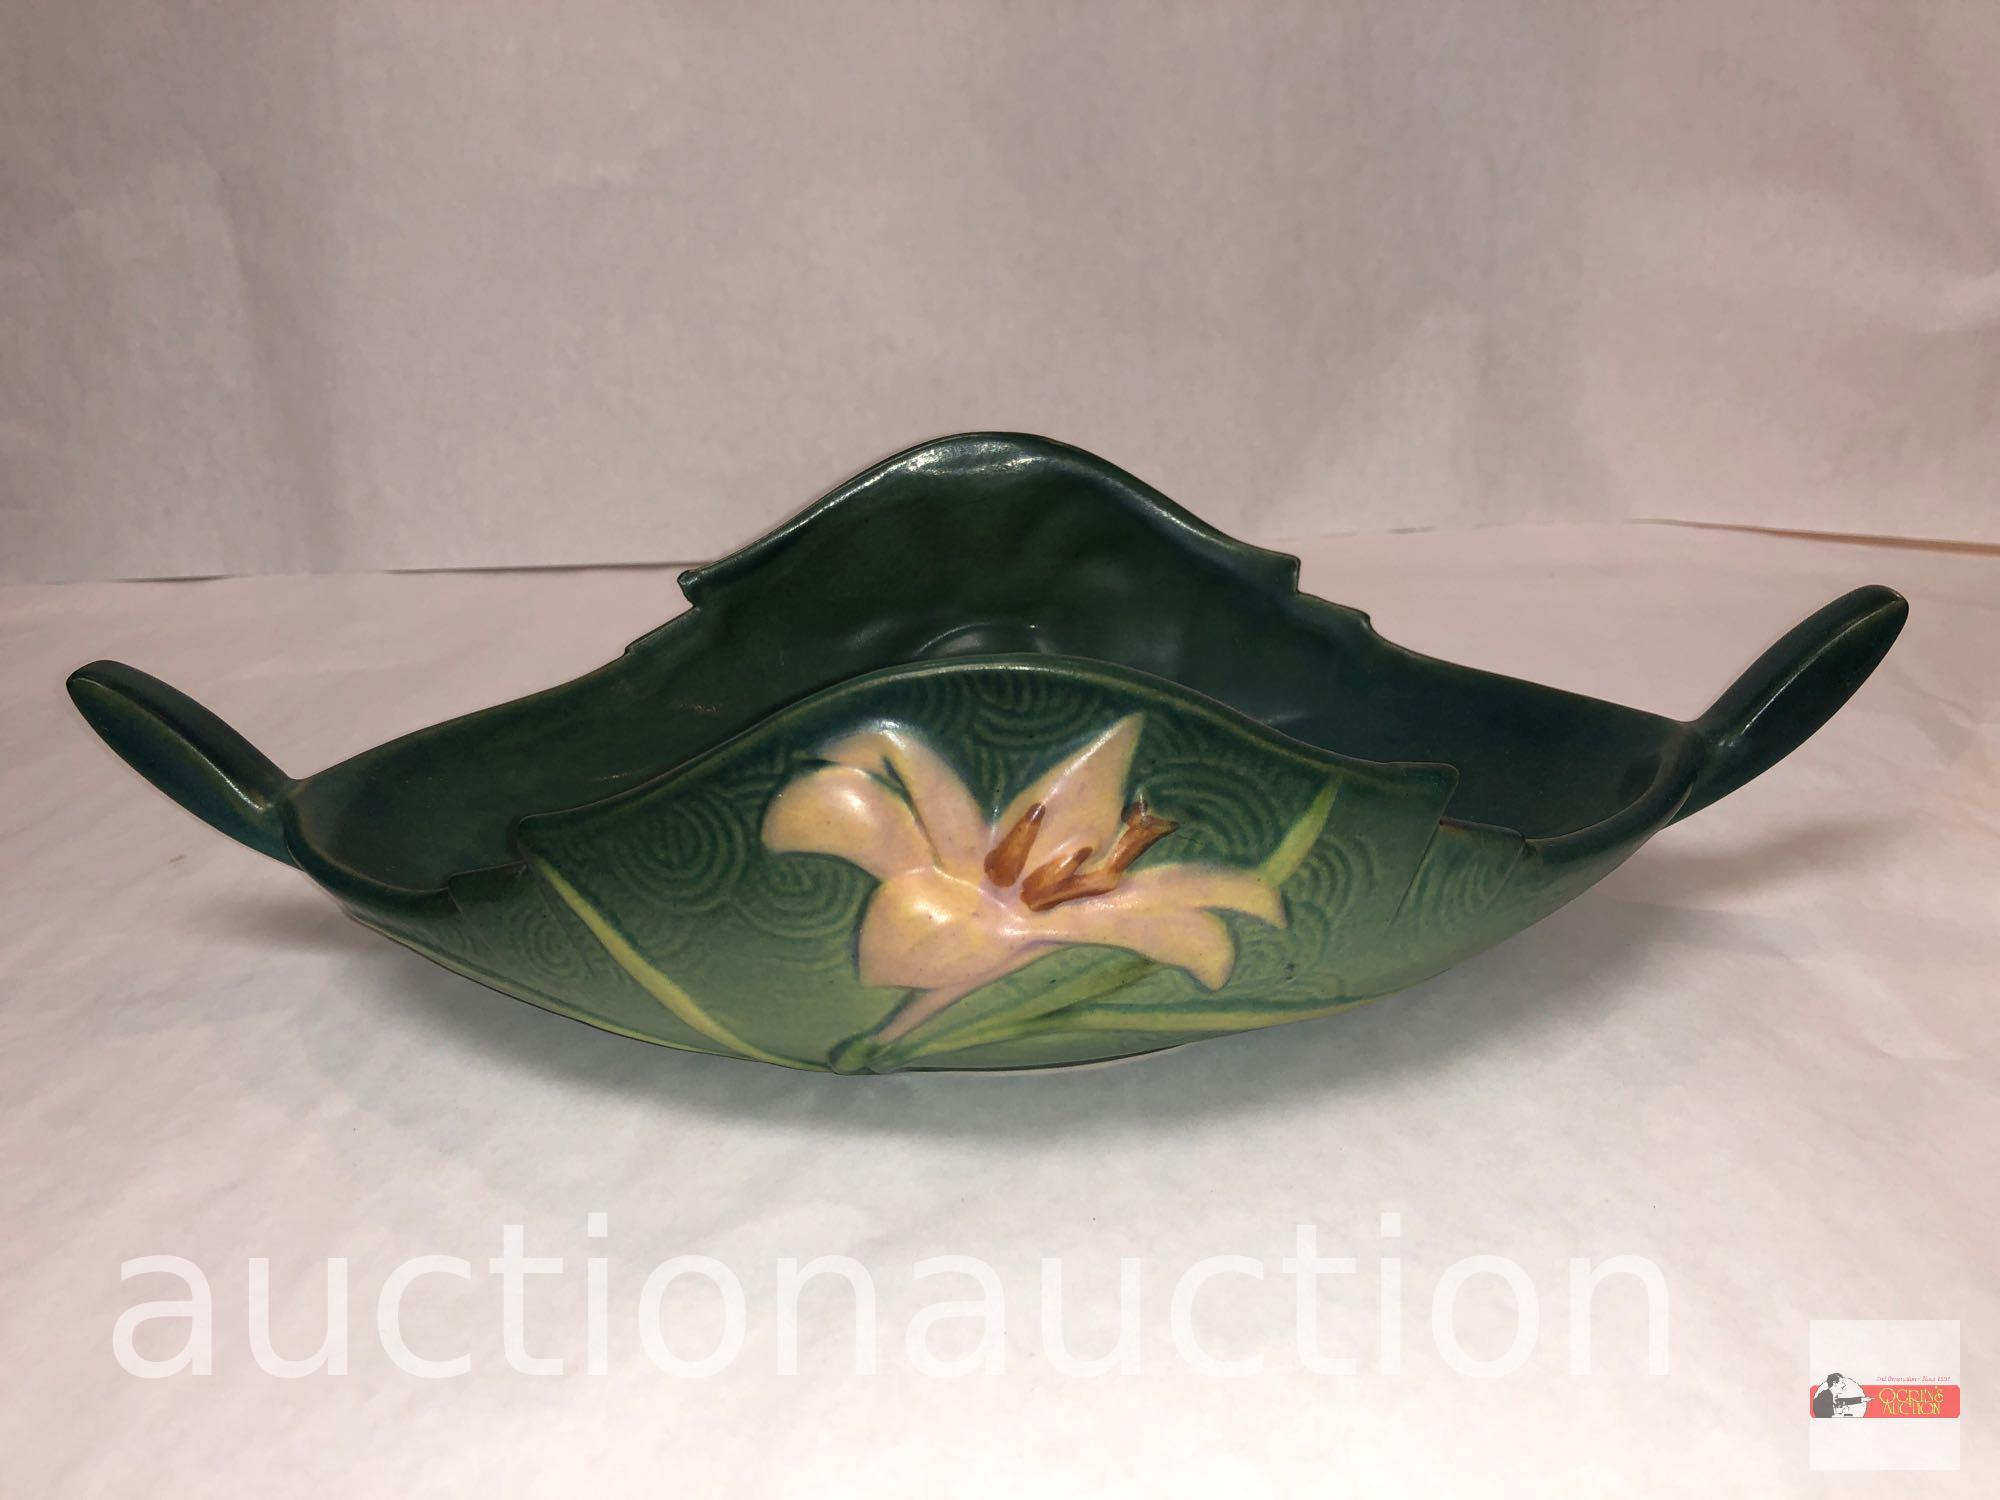 Roseville Pottery - 1946 Zephyr Lily console bowl, #475-10, green, 14"wx7"dx3.75"h